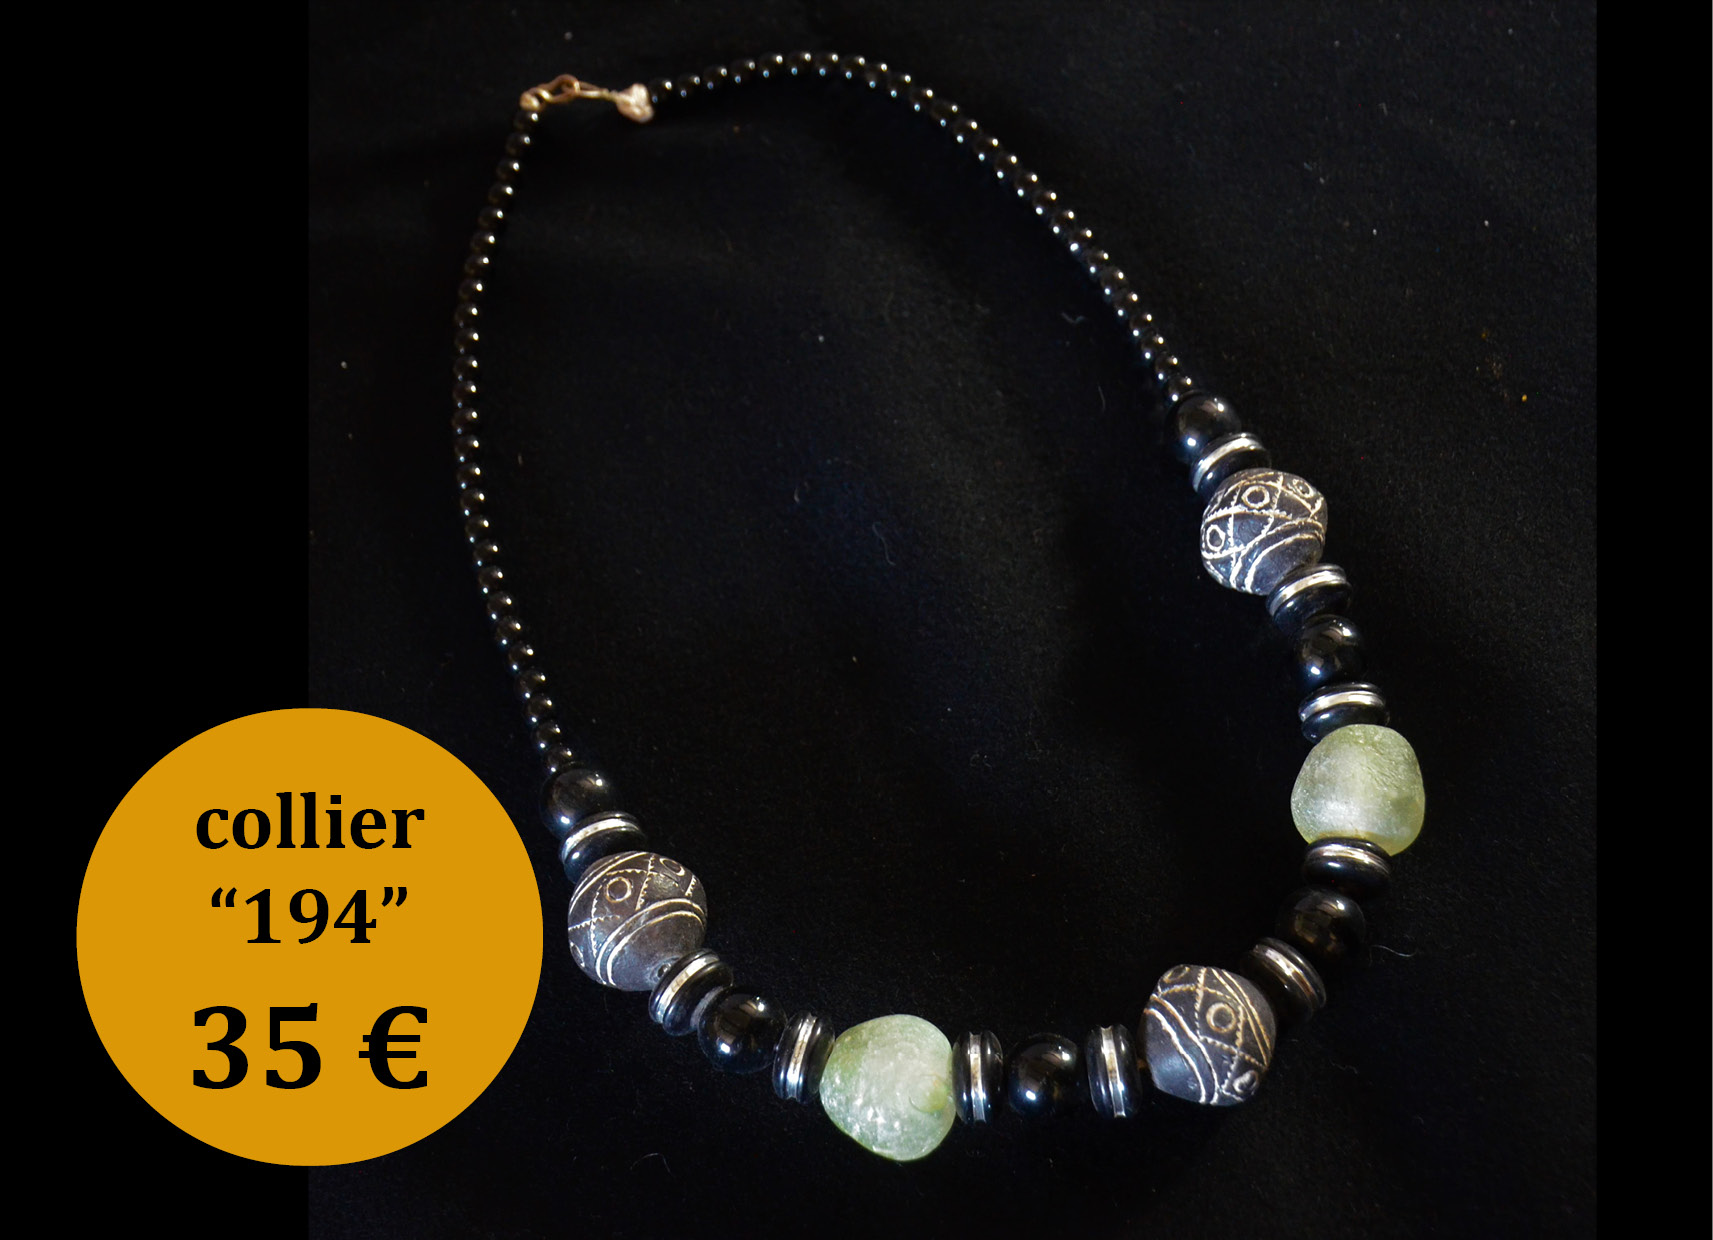 Collier "194"